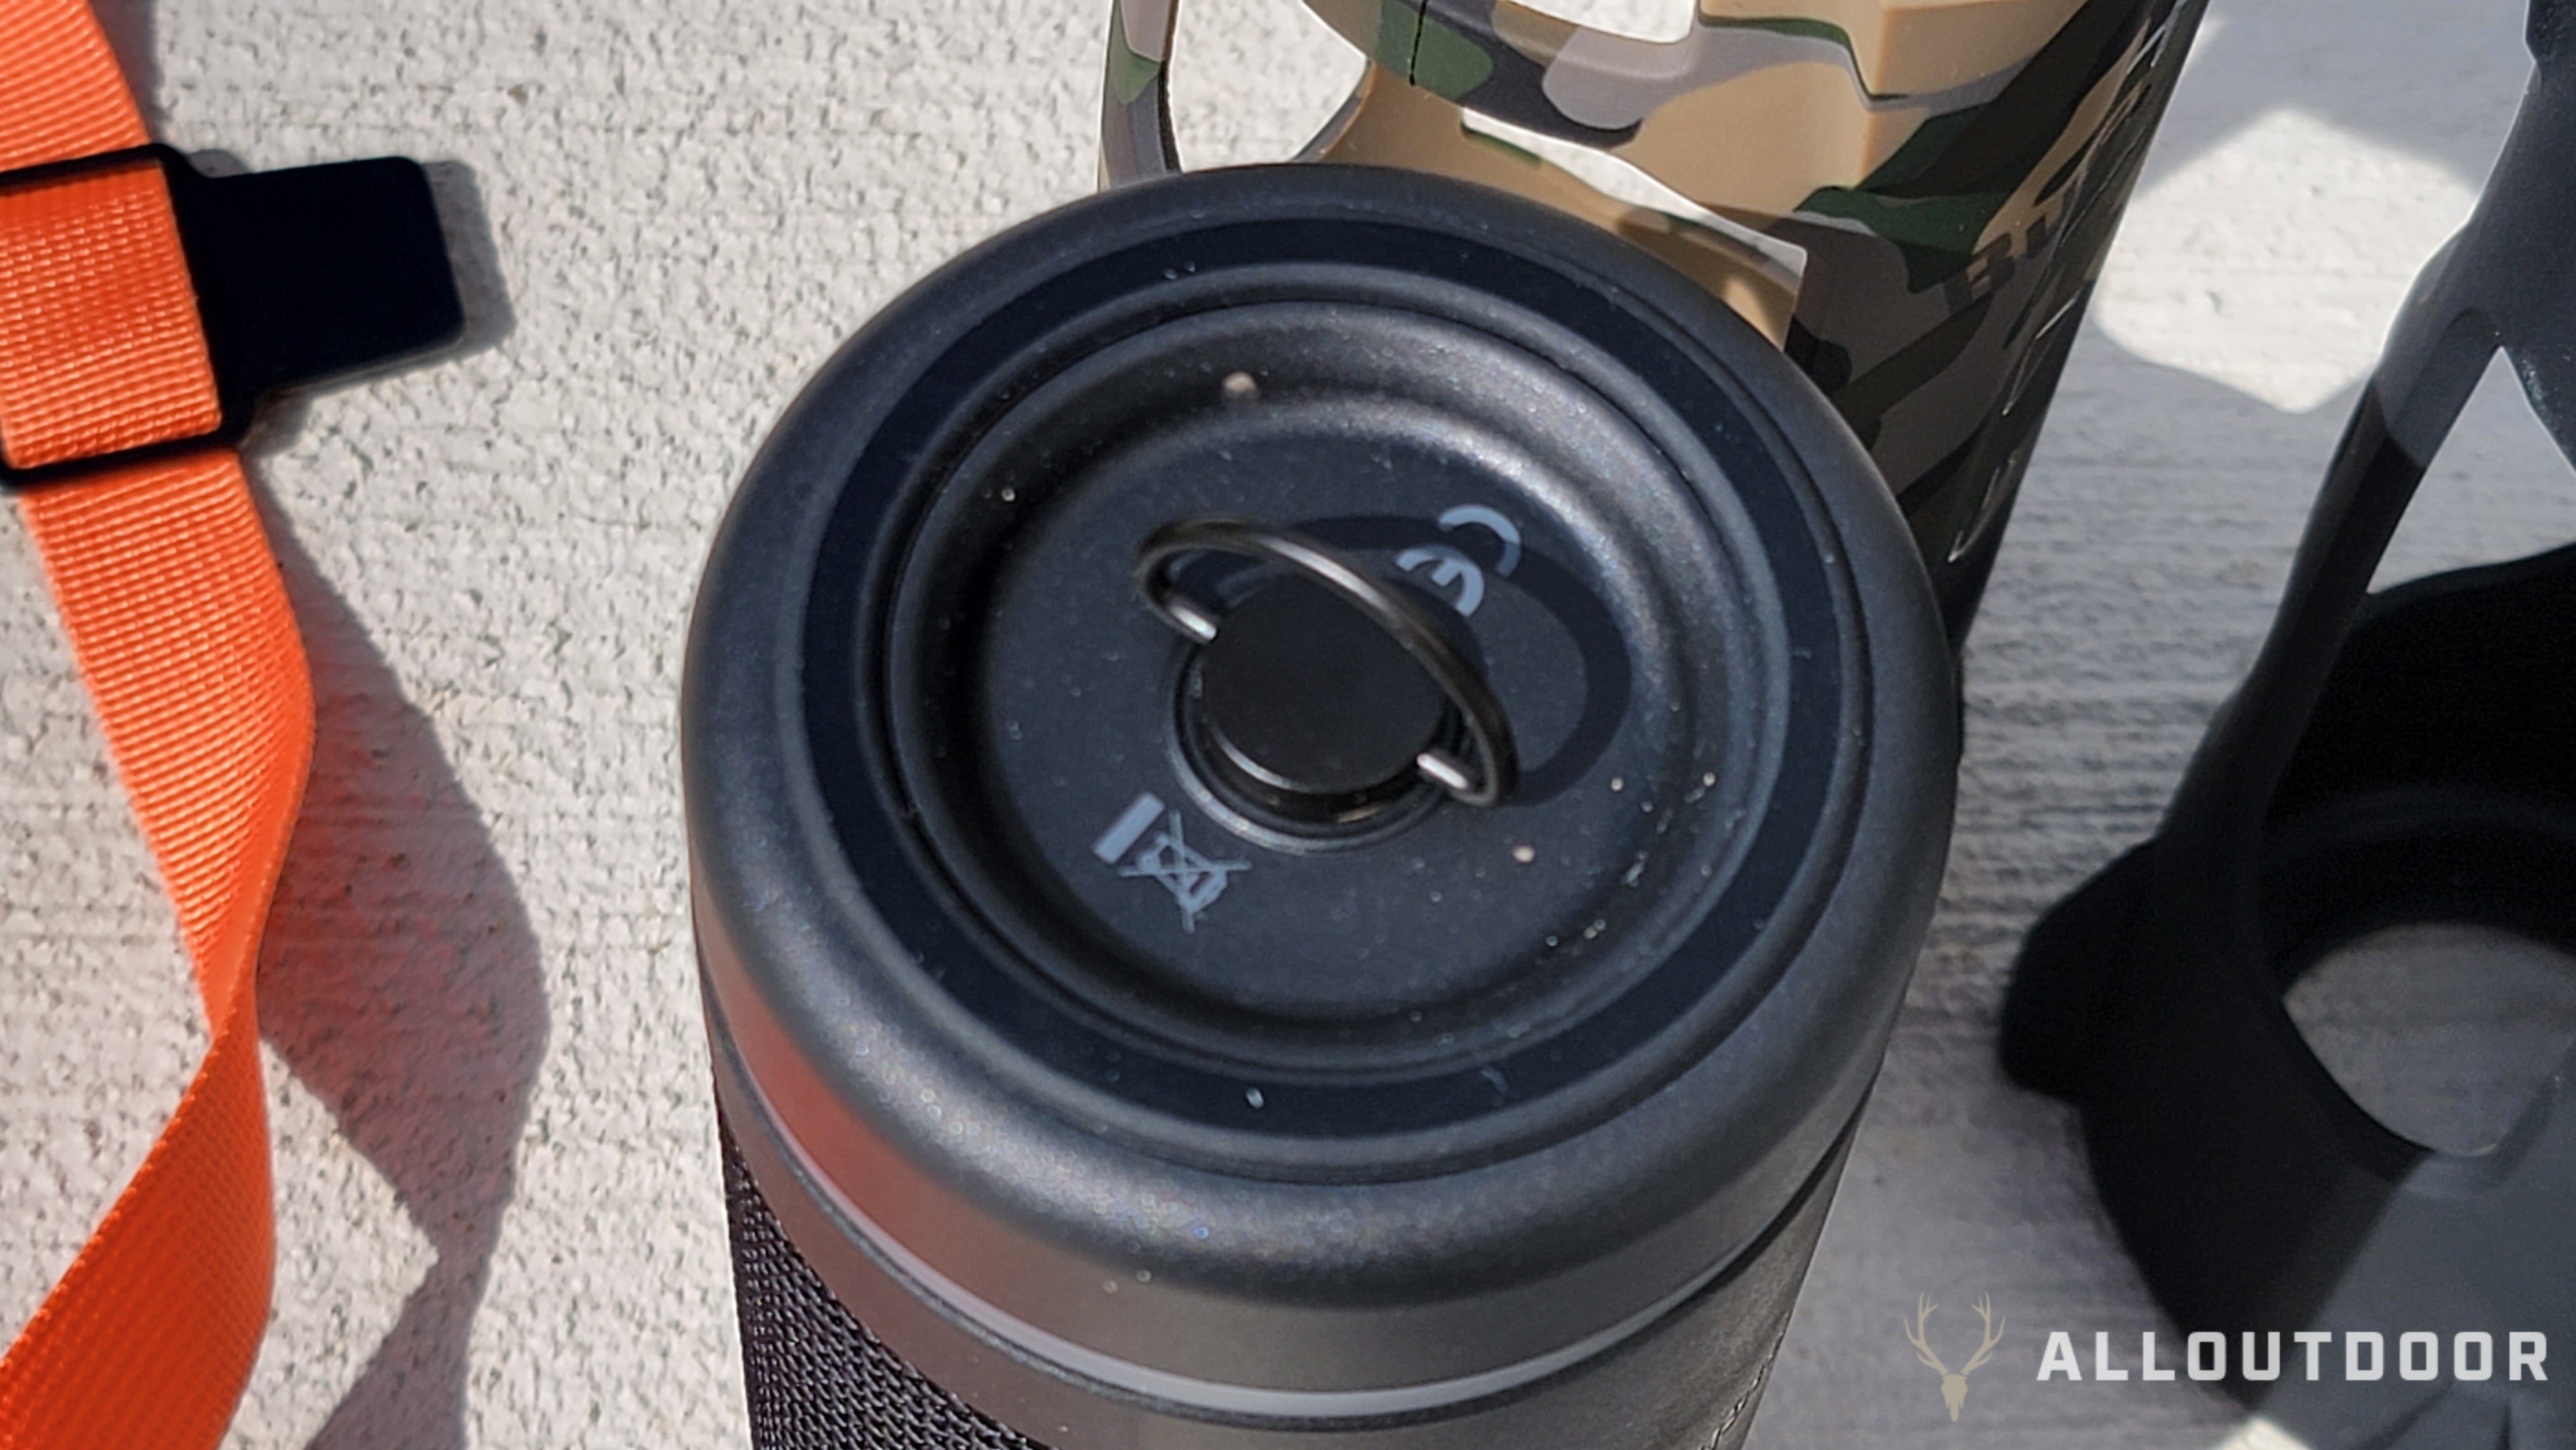 AOD Review: The Bushnell Outdoorsman Bluetooth Speaker